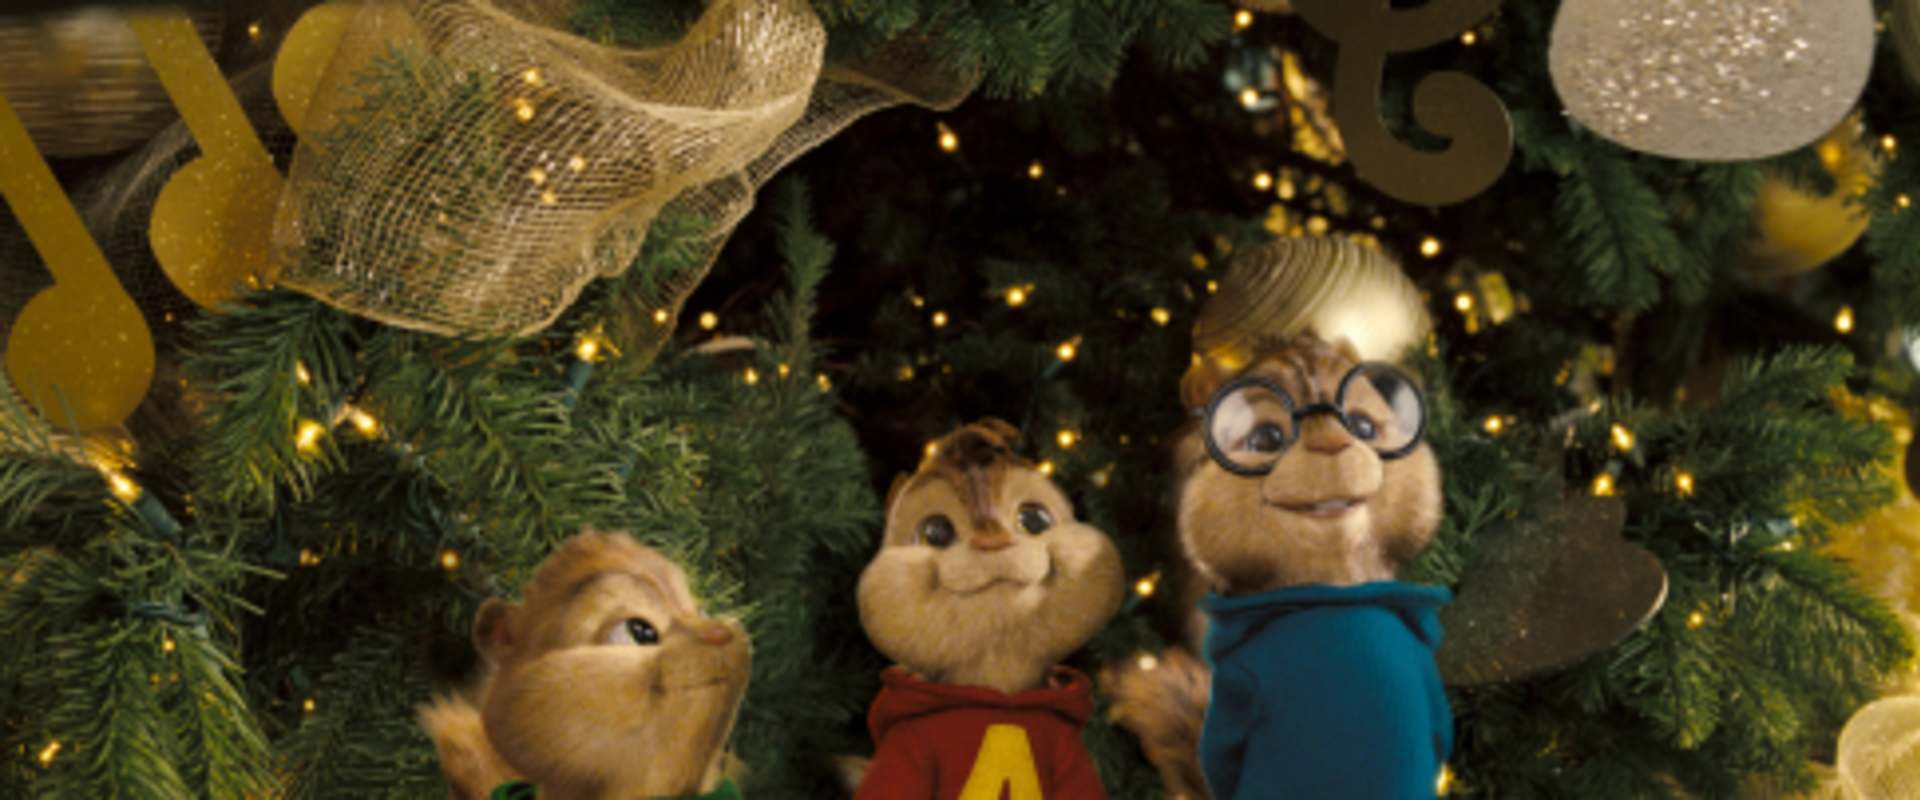 Alvin and the Chipmunks background 2